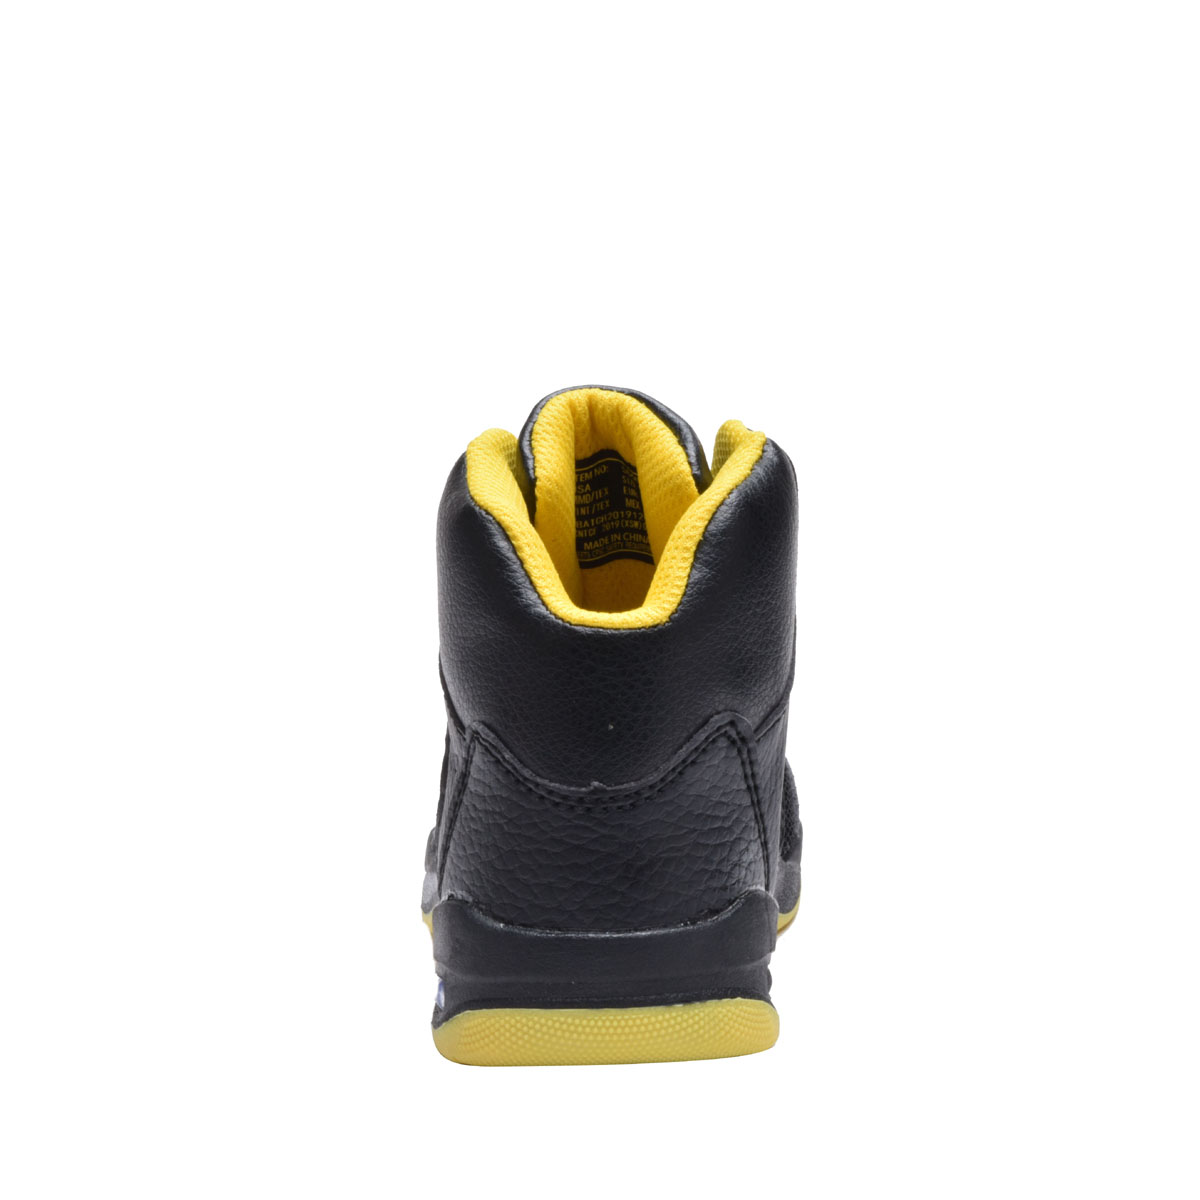 Boys' Basketball Sneakers High Top Kids Shoes - 3 Colors Beige/Black, Black/Red or Black/Yellow - Sizes 10-4 - image 5 of 6